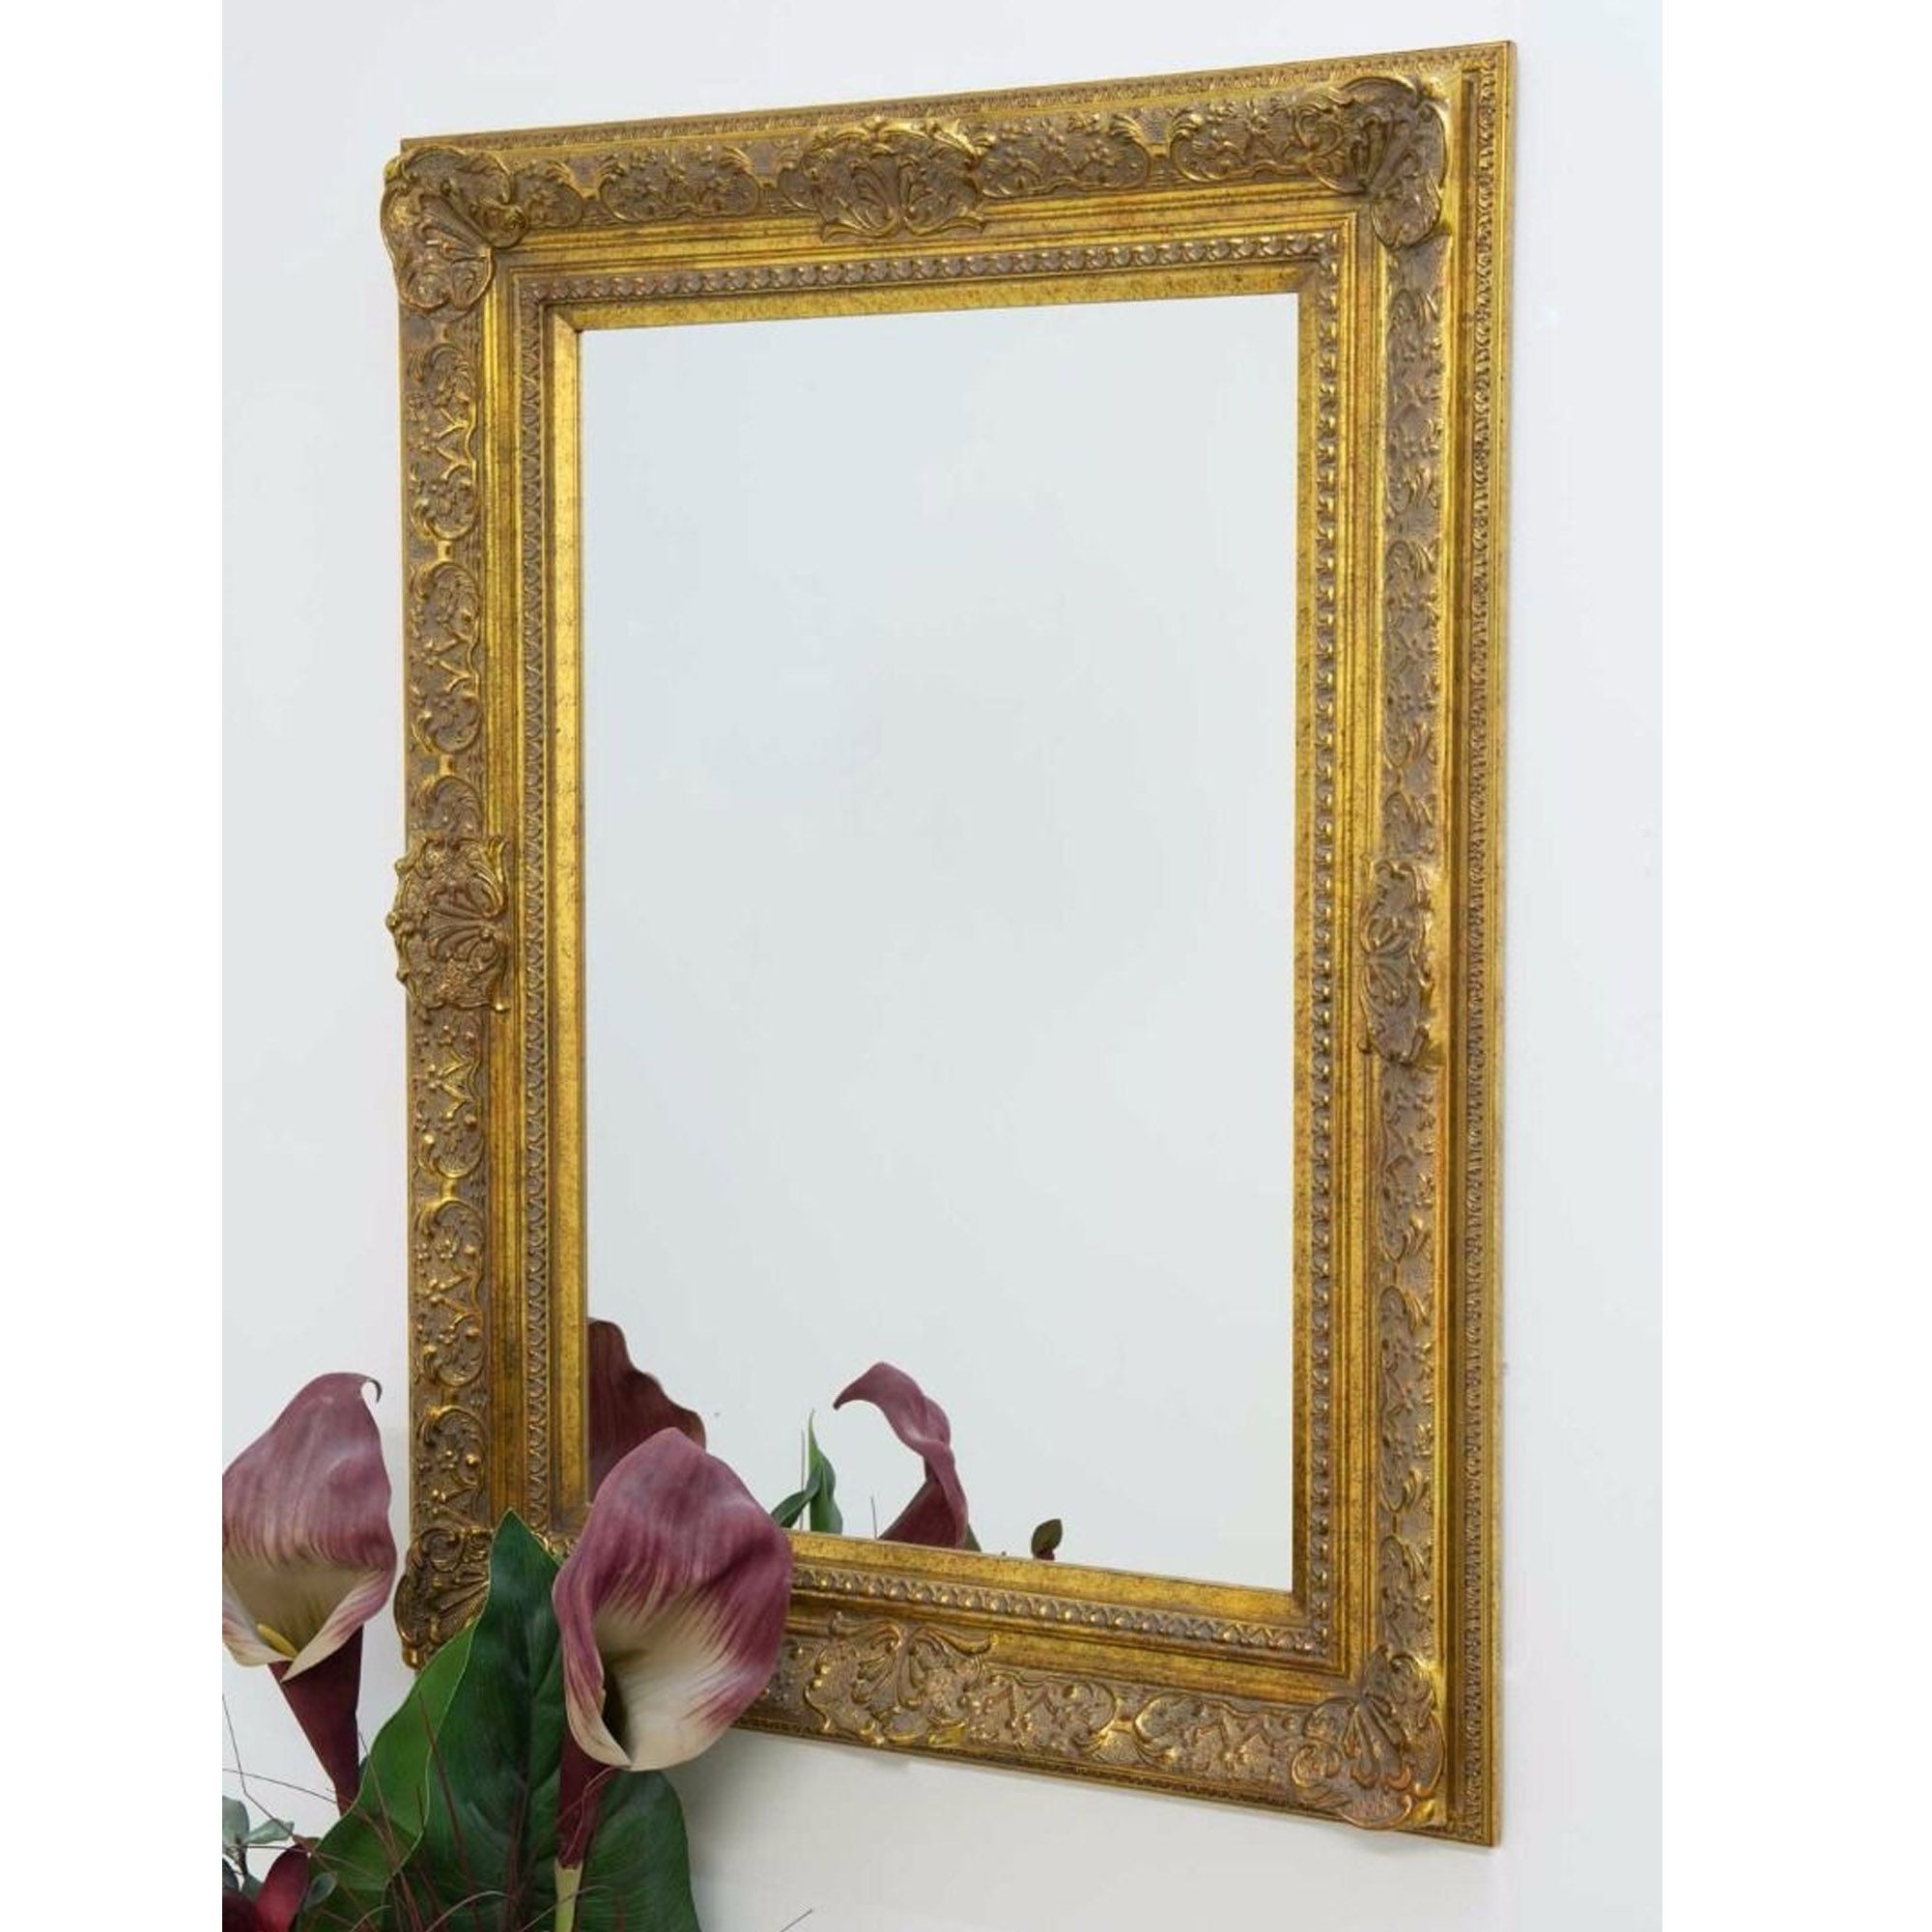 Large Decorative Ornate Gold Antique French Style Wall Mirror – French With Regard To Antique Gold Scallop Wall Mirrors (View 3 of 15)